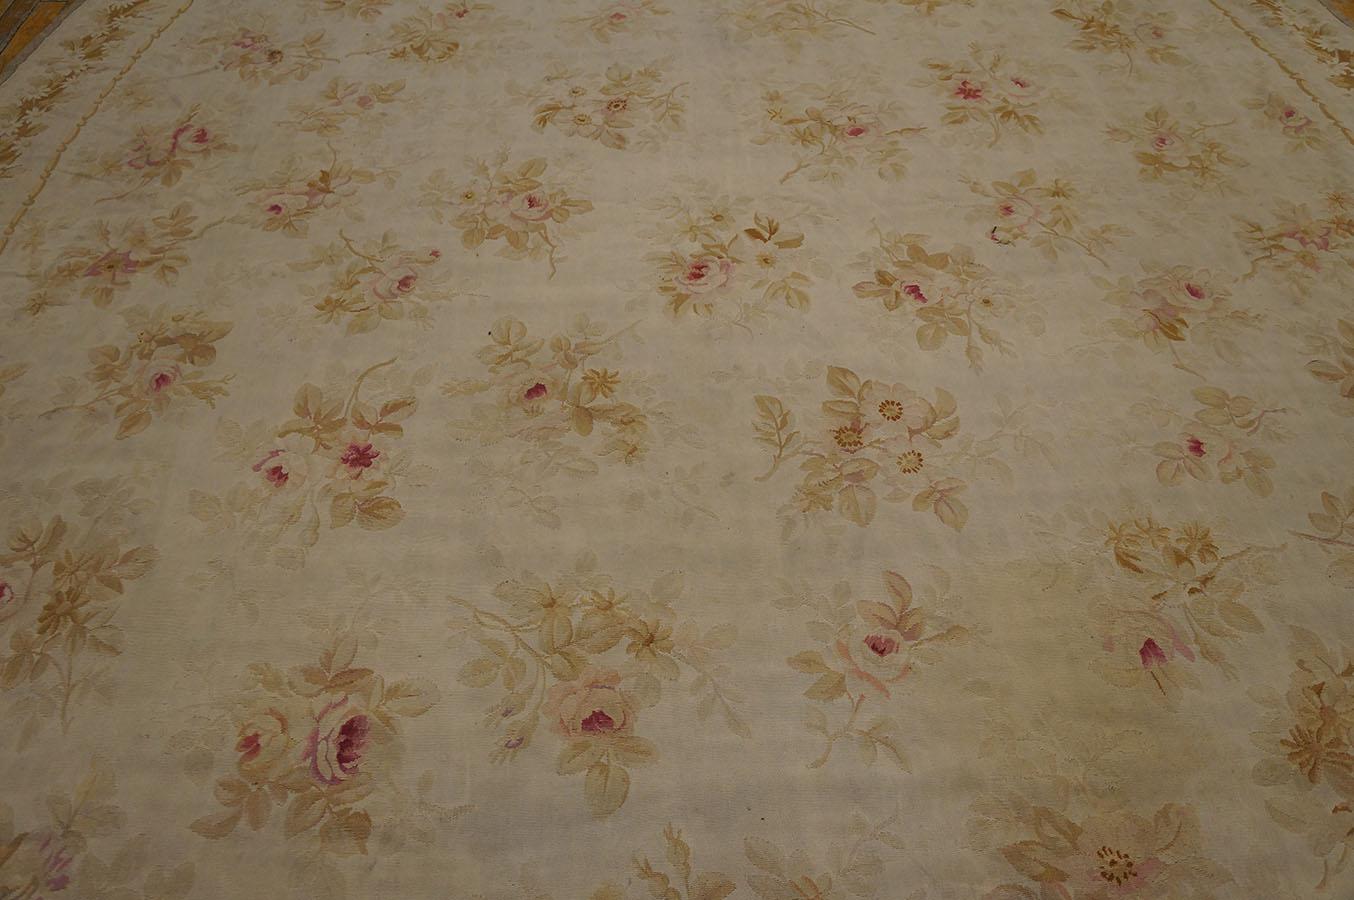 Late 19th Century French Aubusson Carpet ( 8' 4'' x 13' 4'' - 255 x 405 cm )  For Sale 1